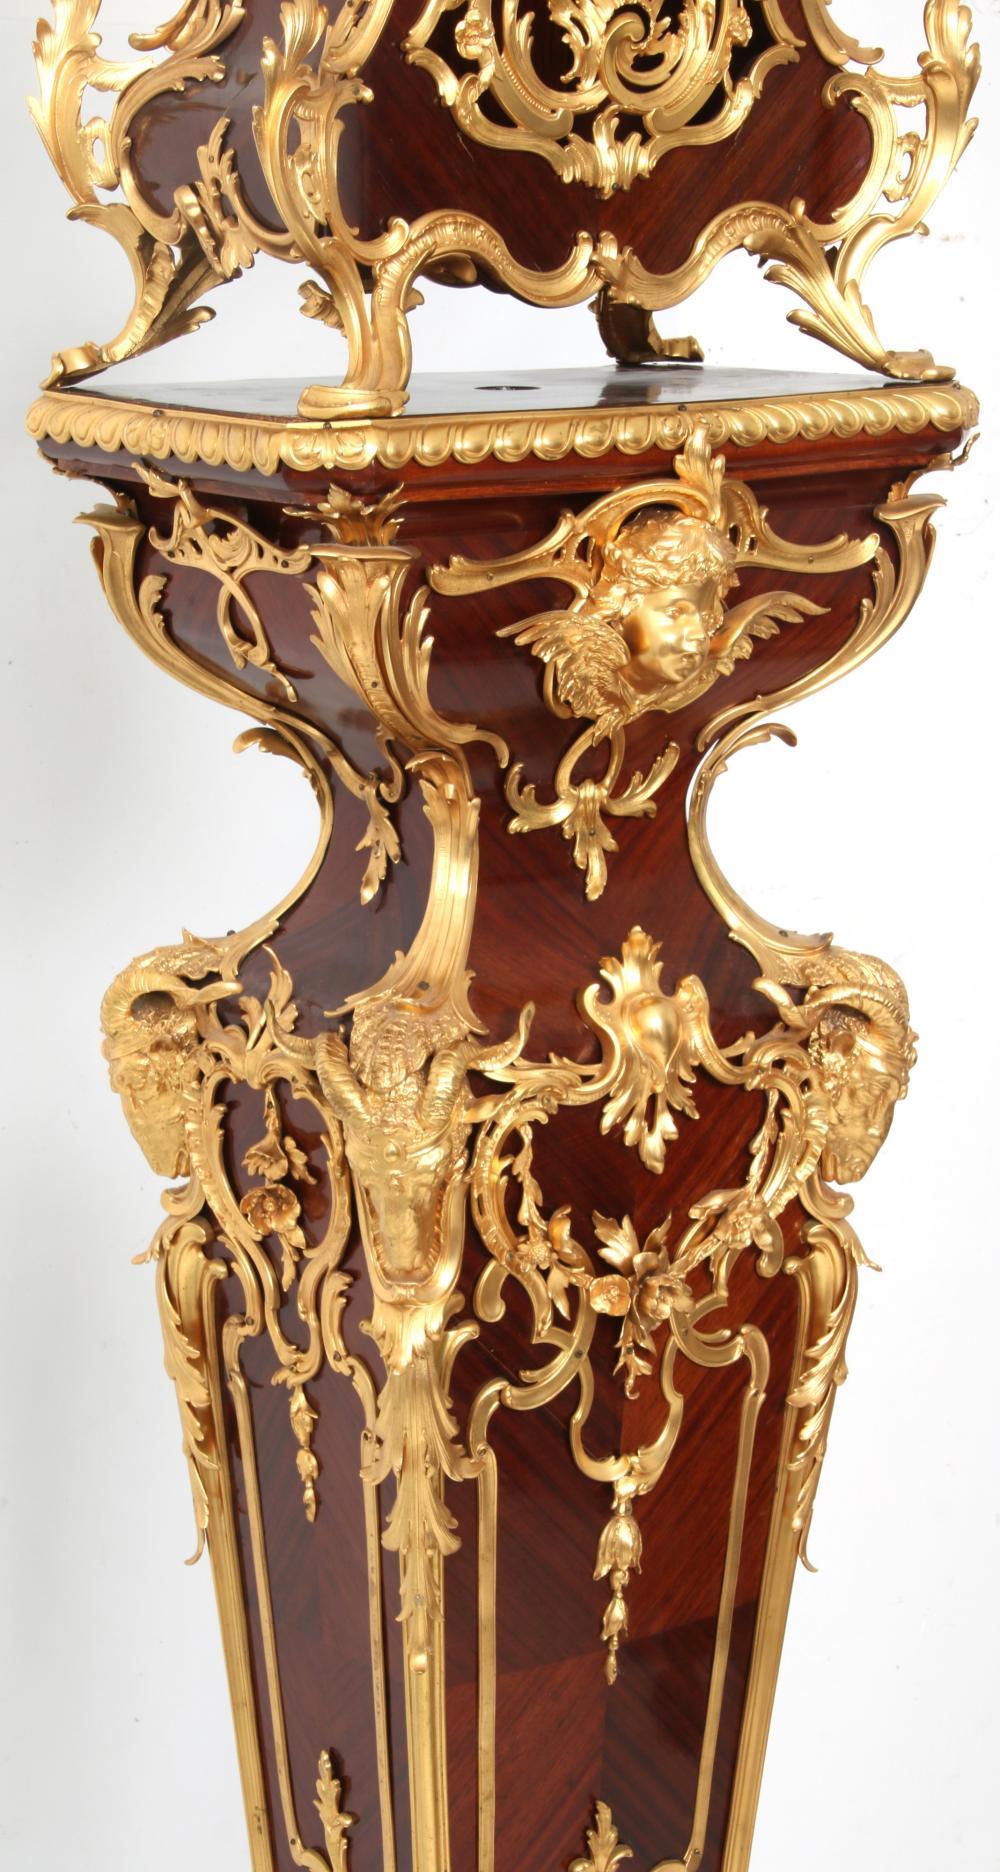 19th Century Louis XV Style Gilt Bronze Mounted Mahogany Clock on Pedestal For Sale 3